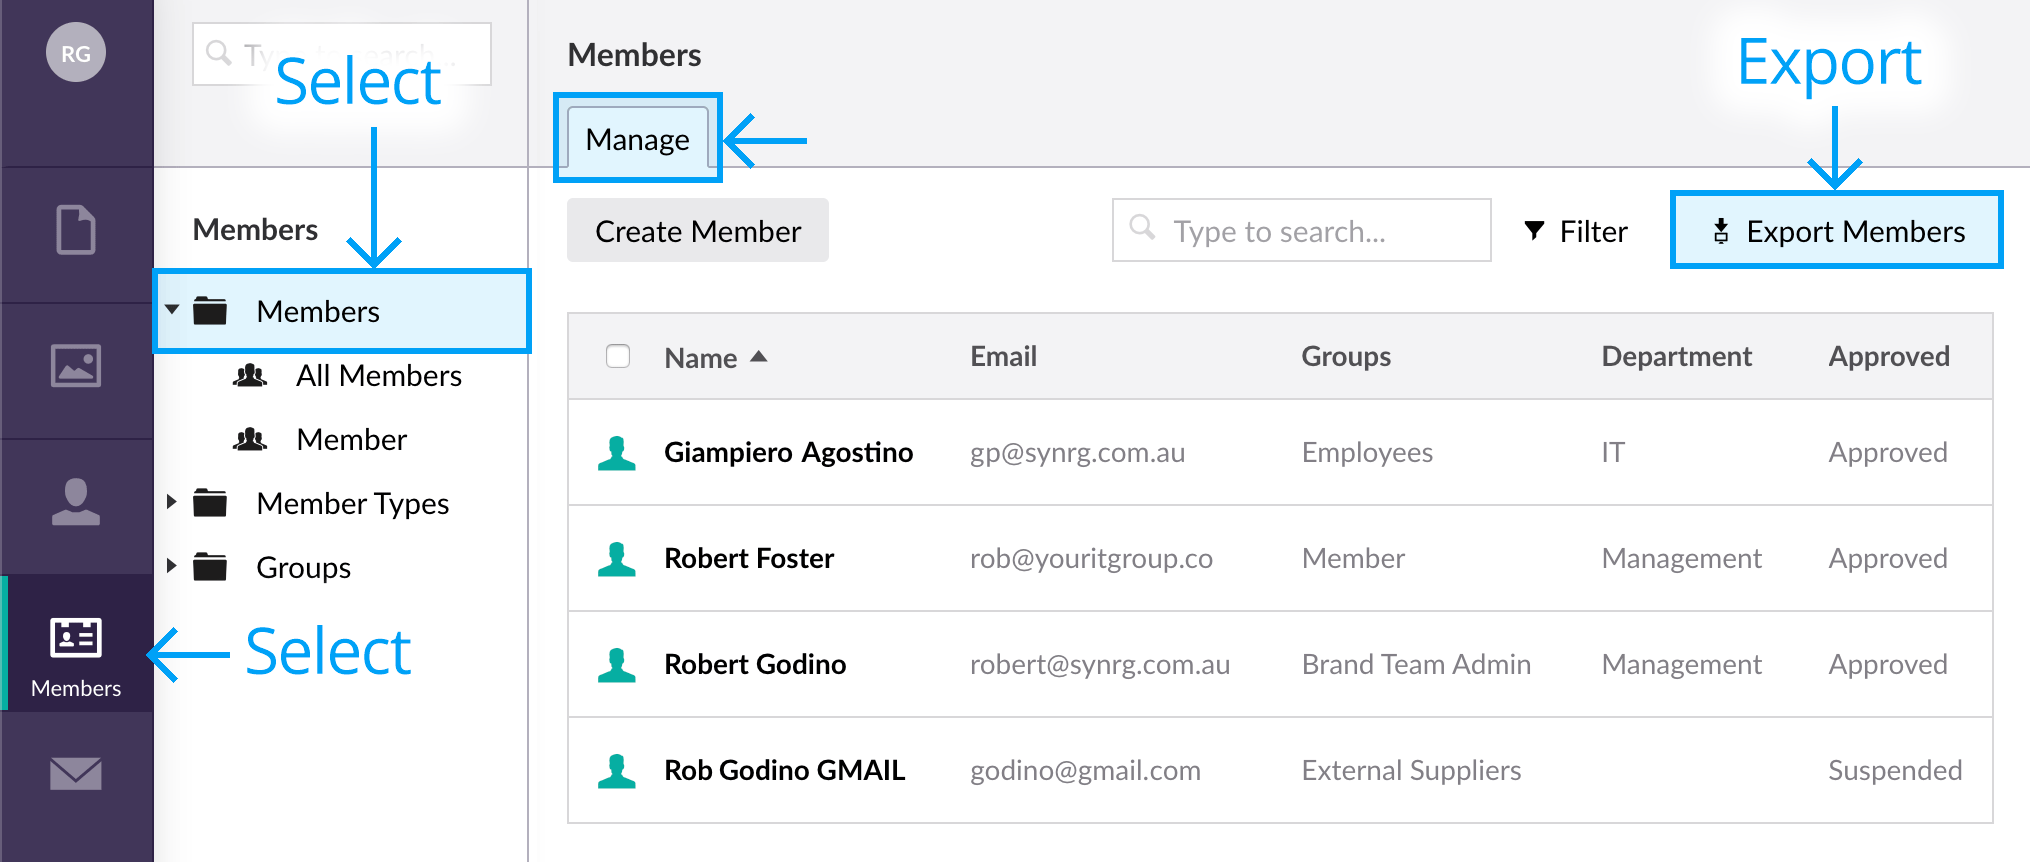 Export members button in the members backoffice area